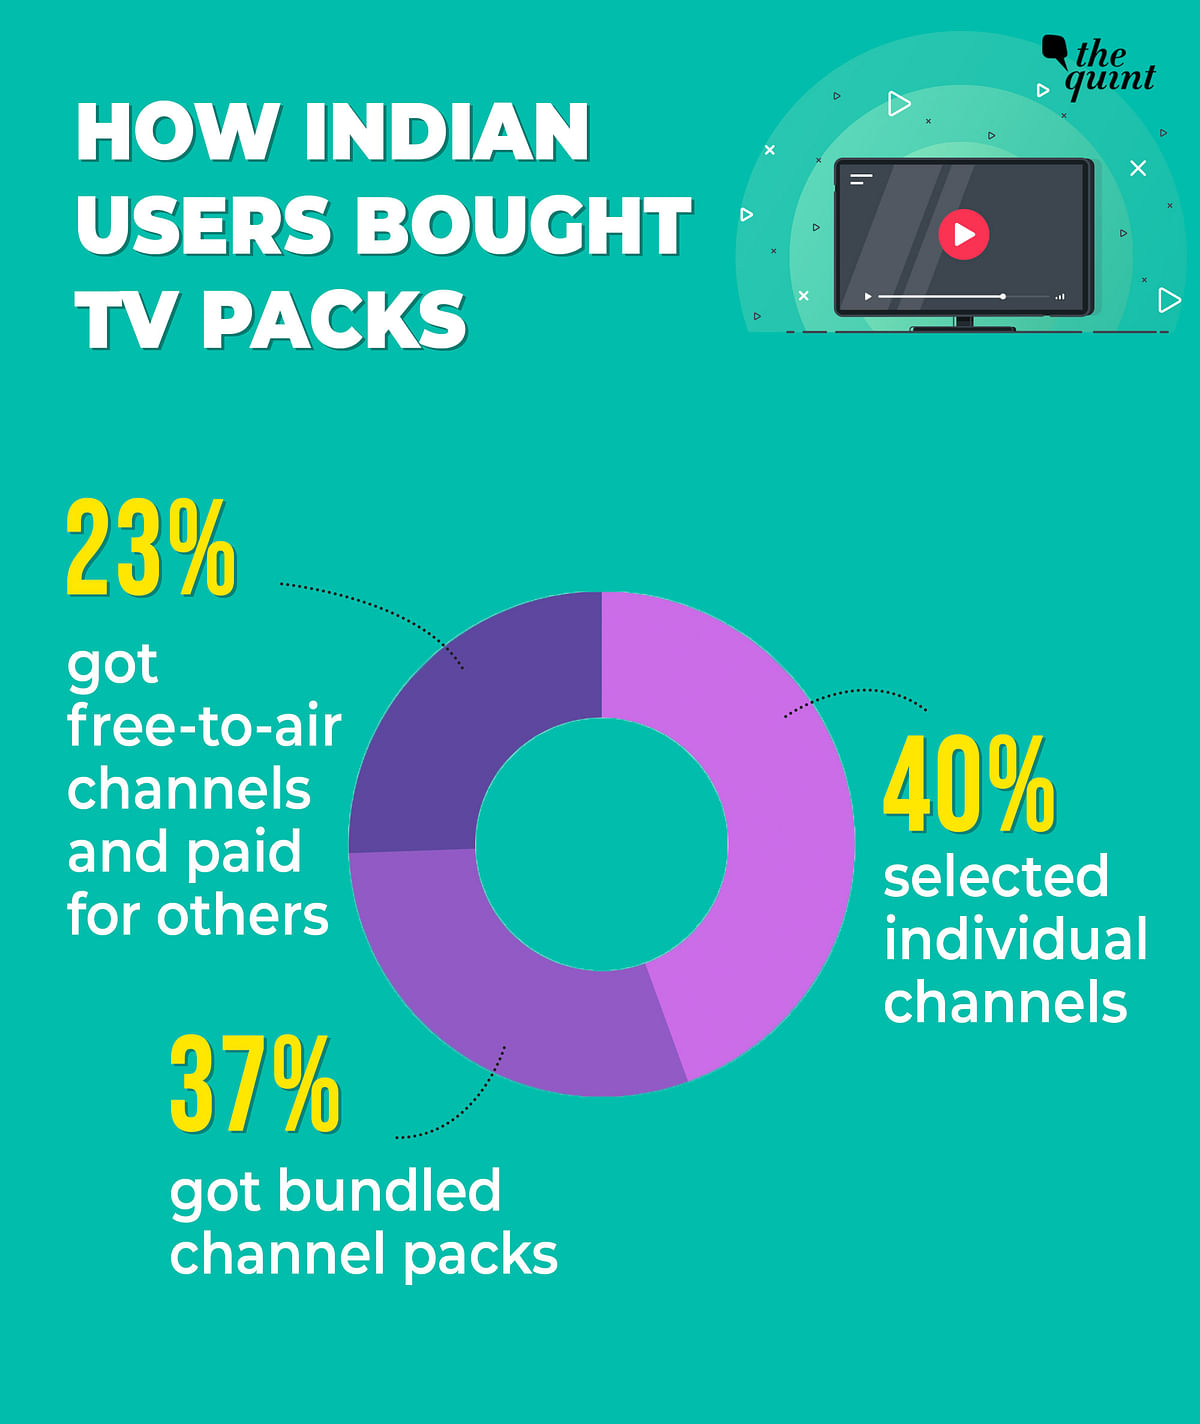 The report highlights the impact of increased TV channel prices on viewers after TRAI changed the tariff structure.